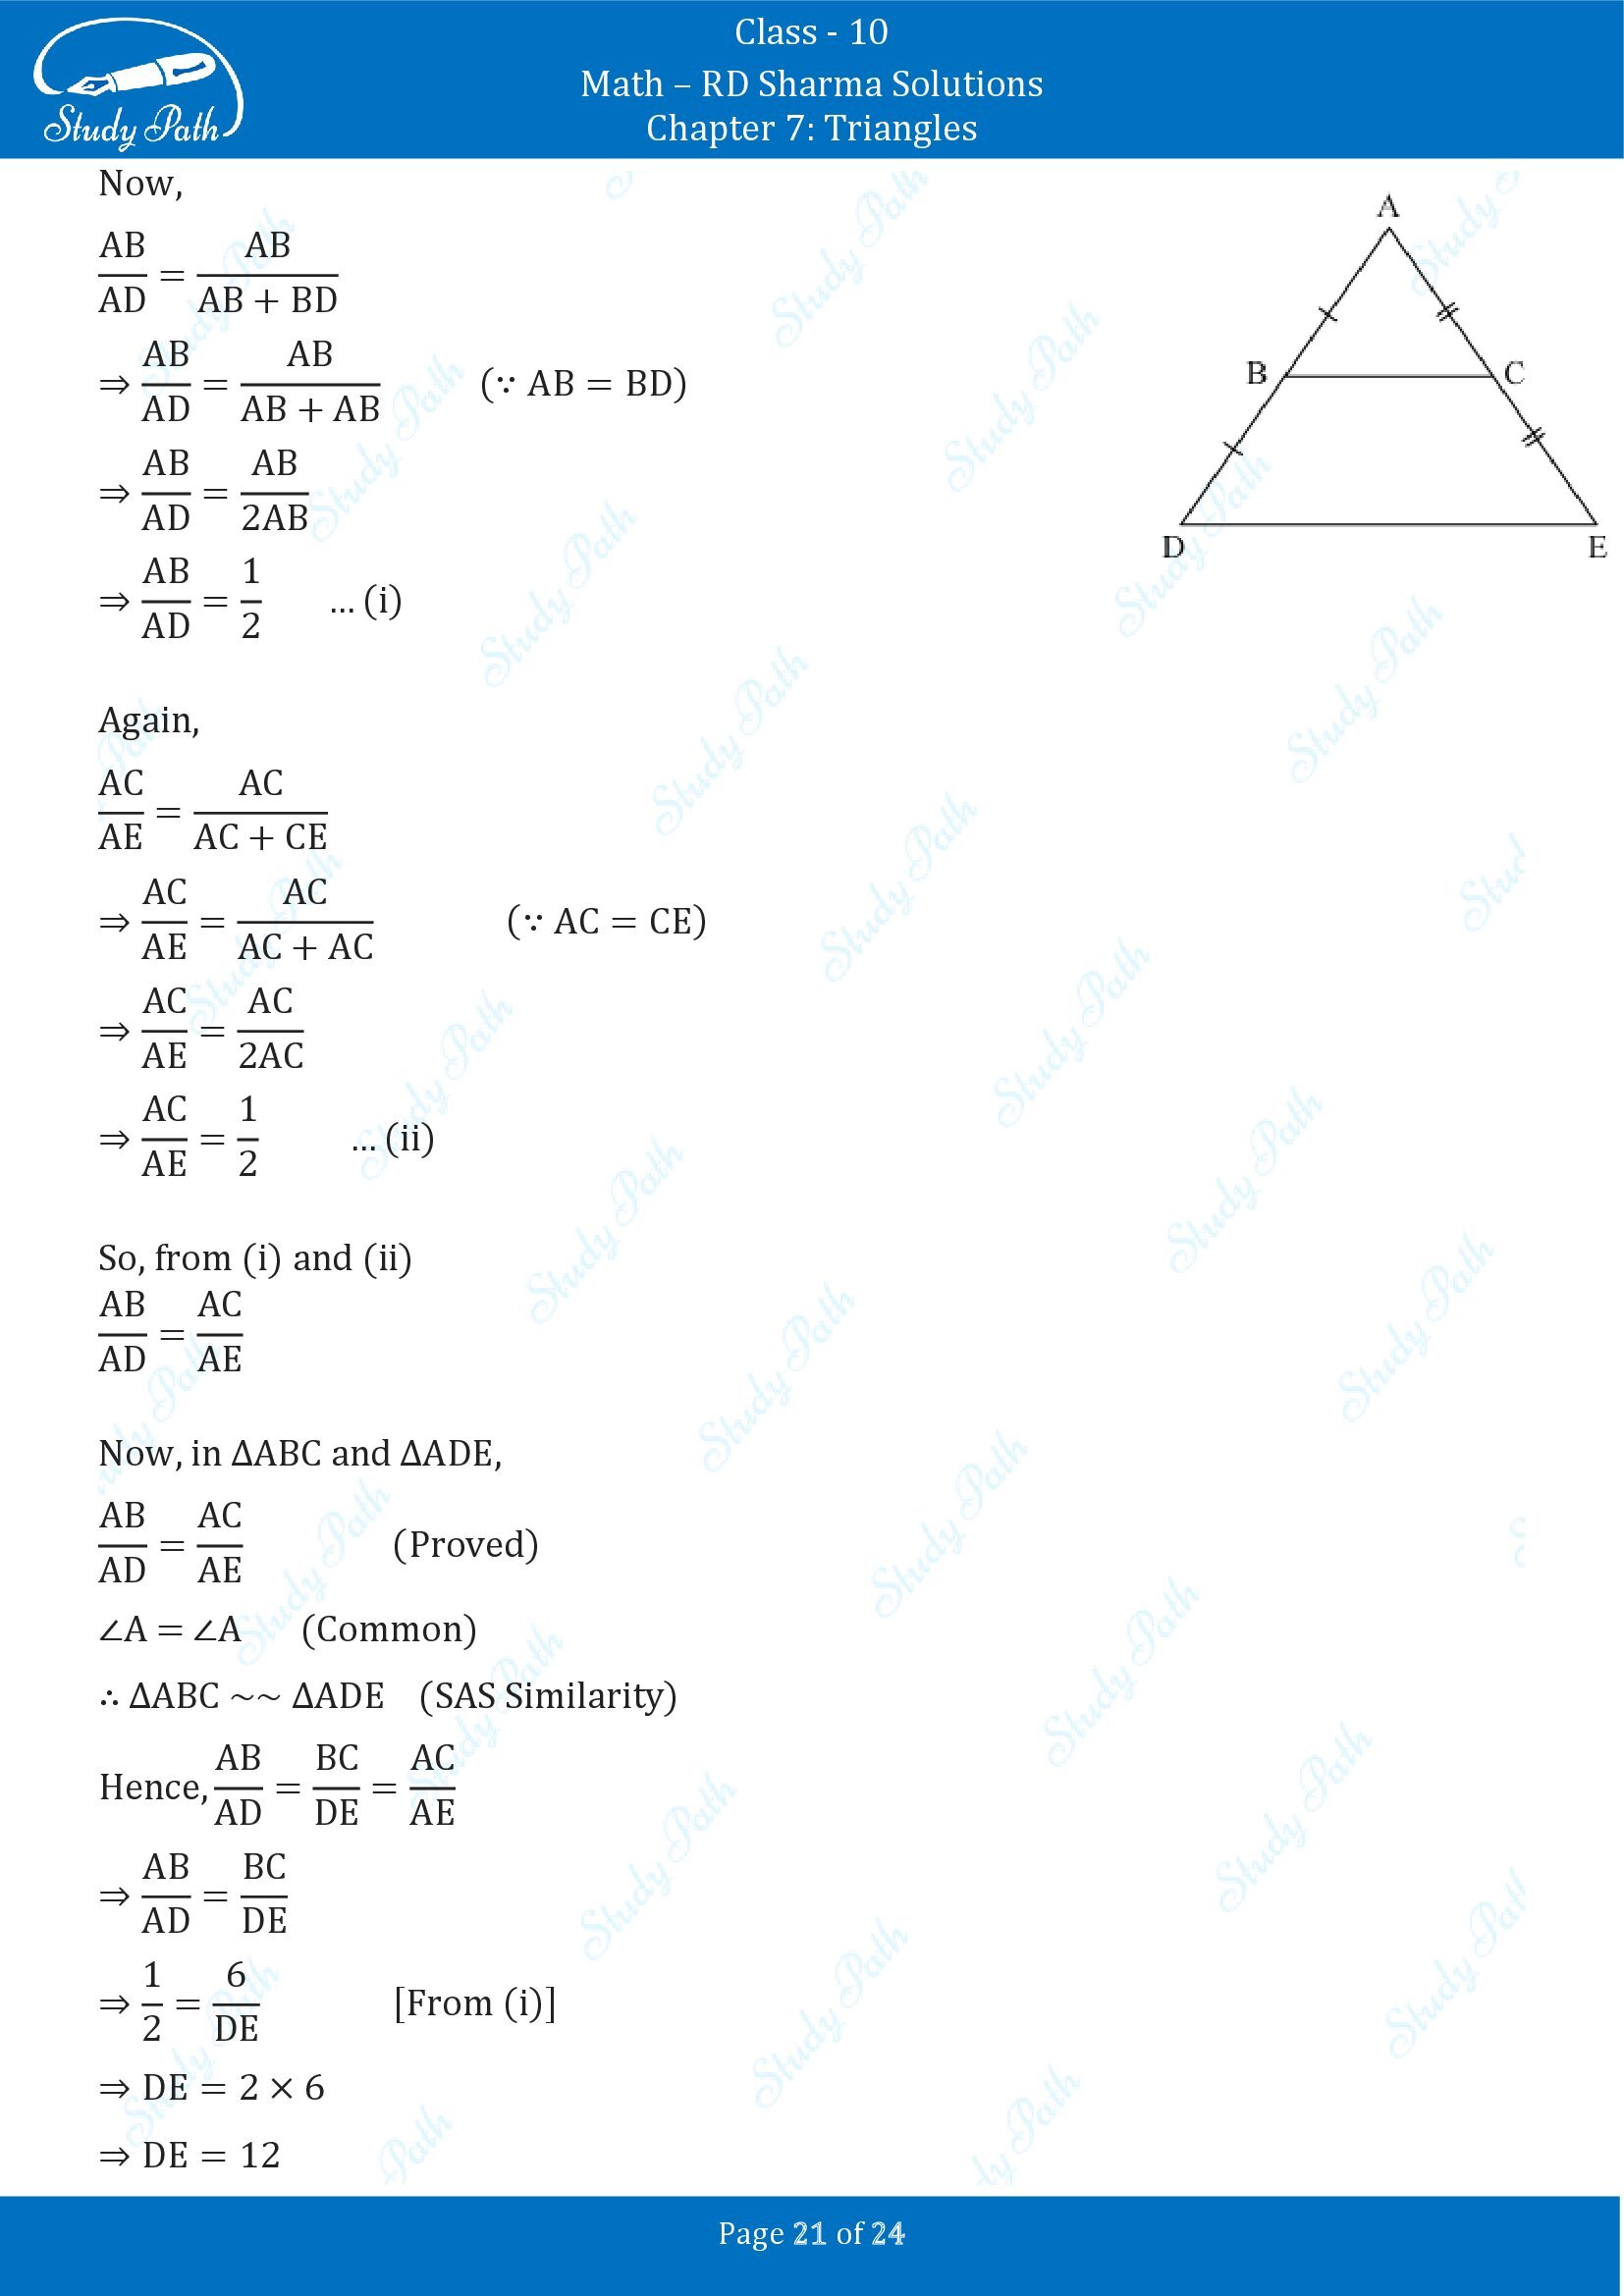 RD Sharma Solutions Class 10 Chapter 7 Triangles Fill in the Blank Type Questions FBQs 00021